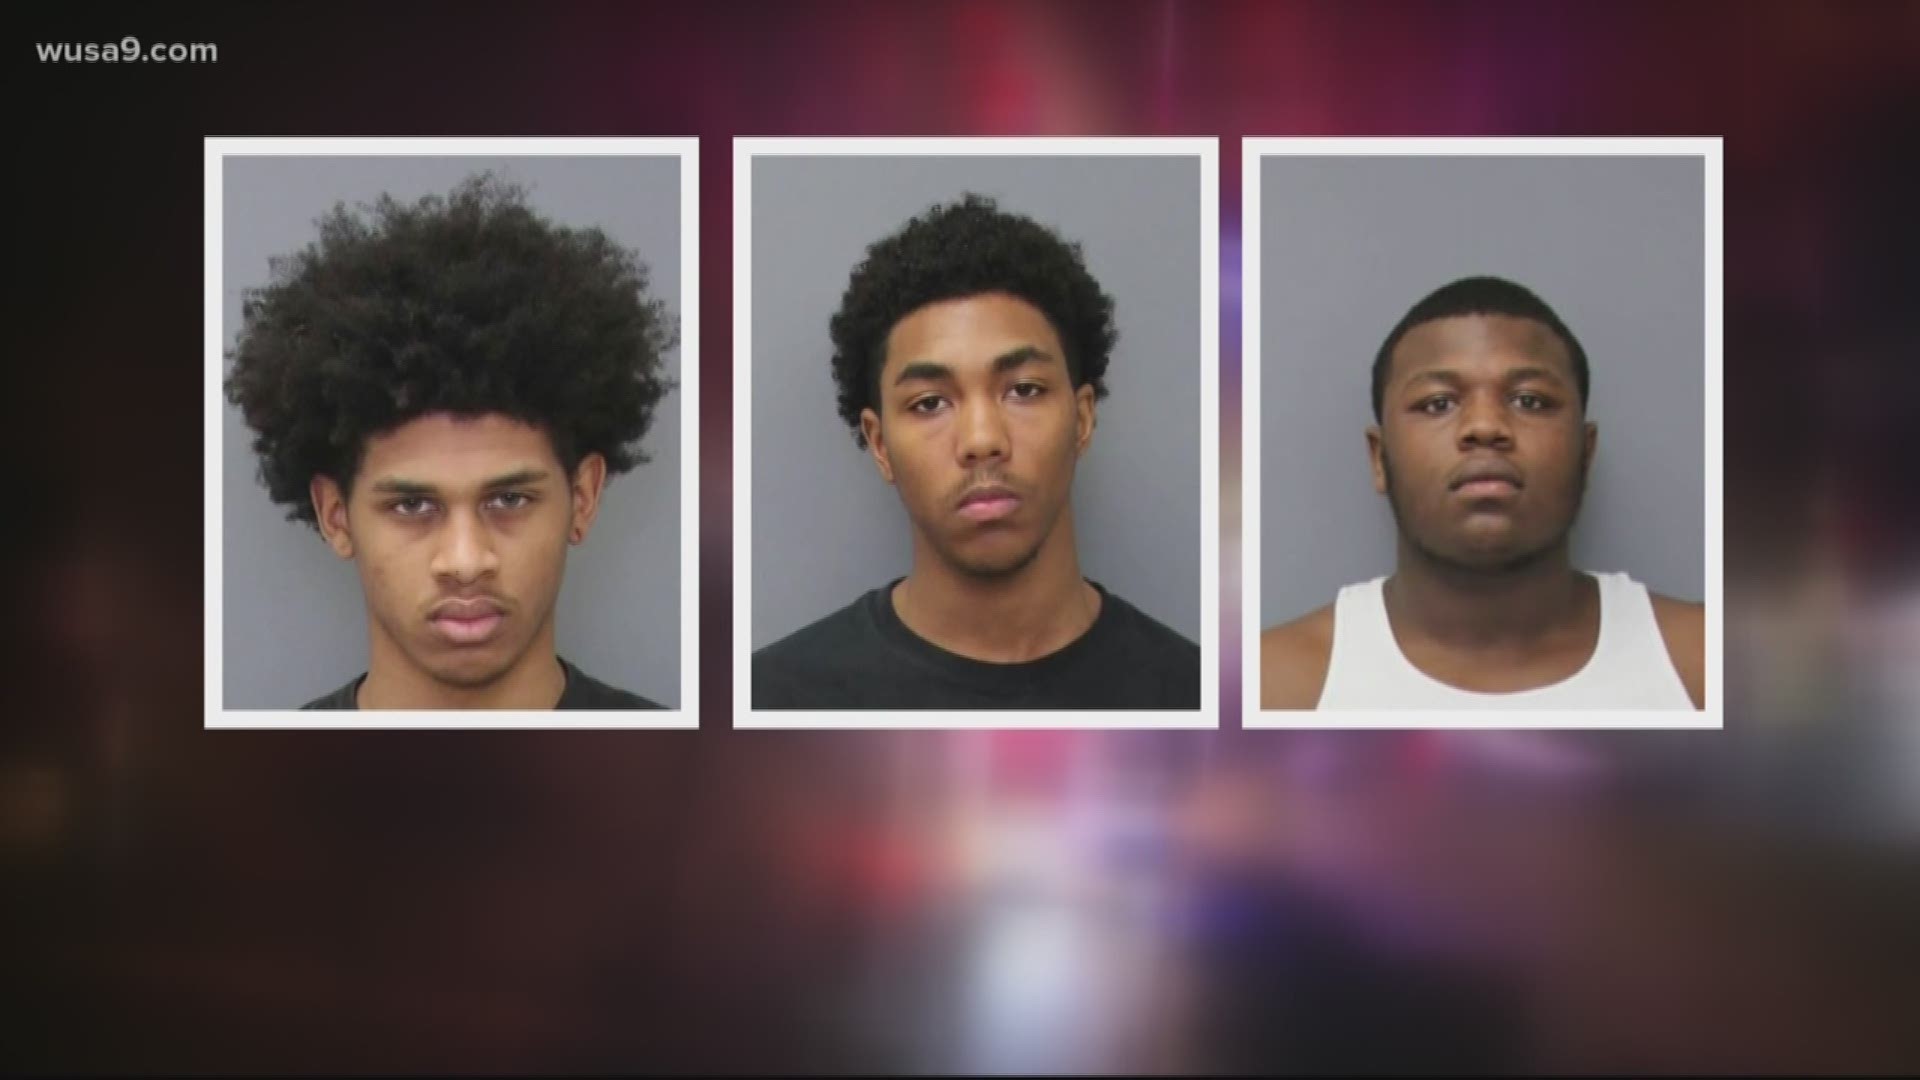 All three suspects are charged with first-degree murder and armed robbery, police say.